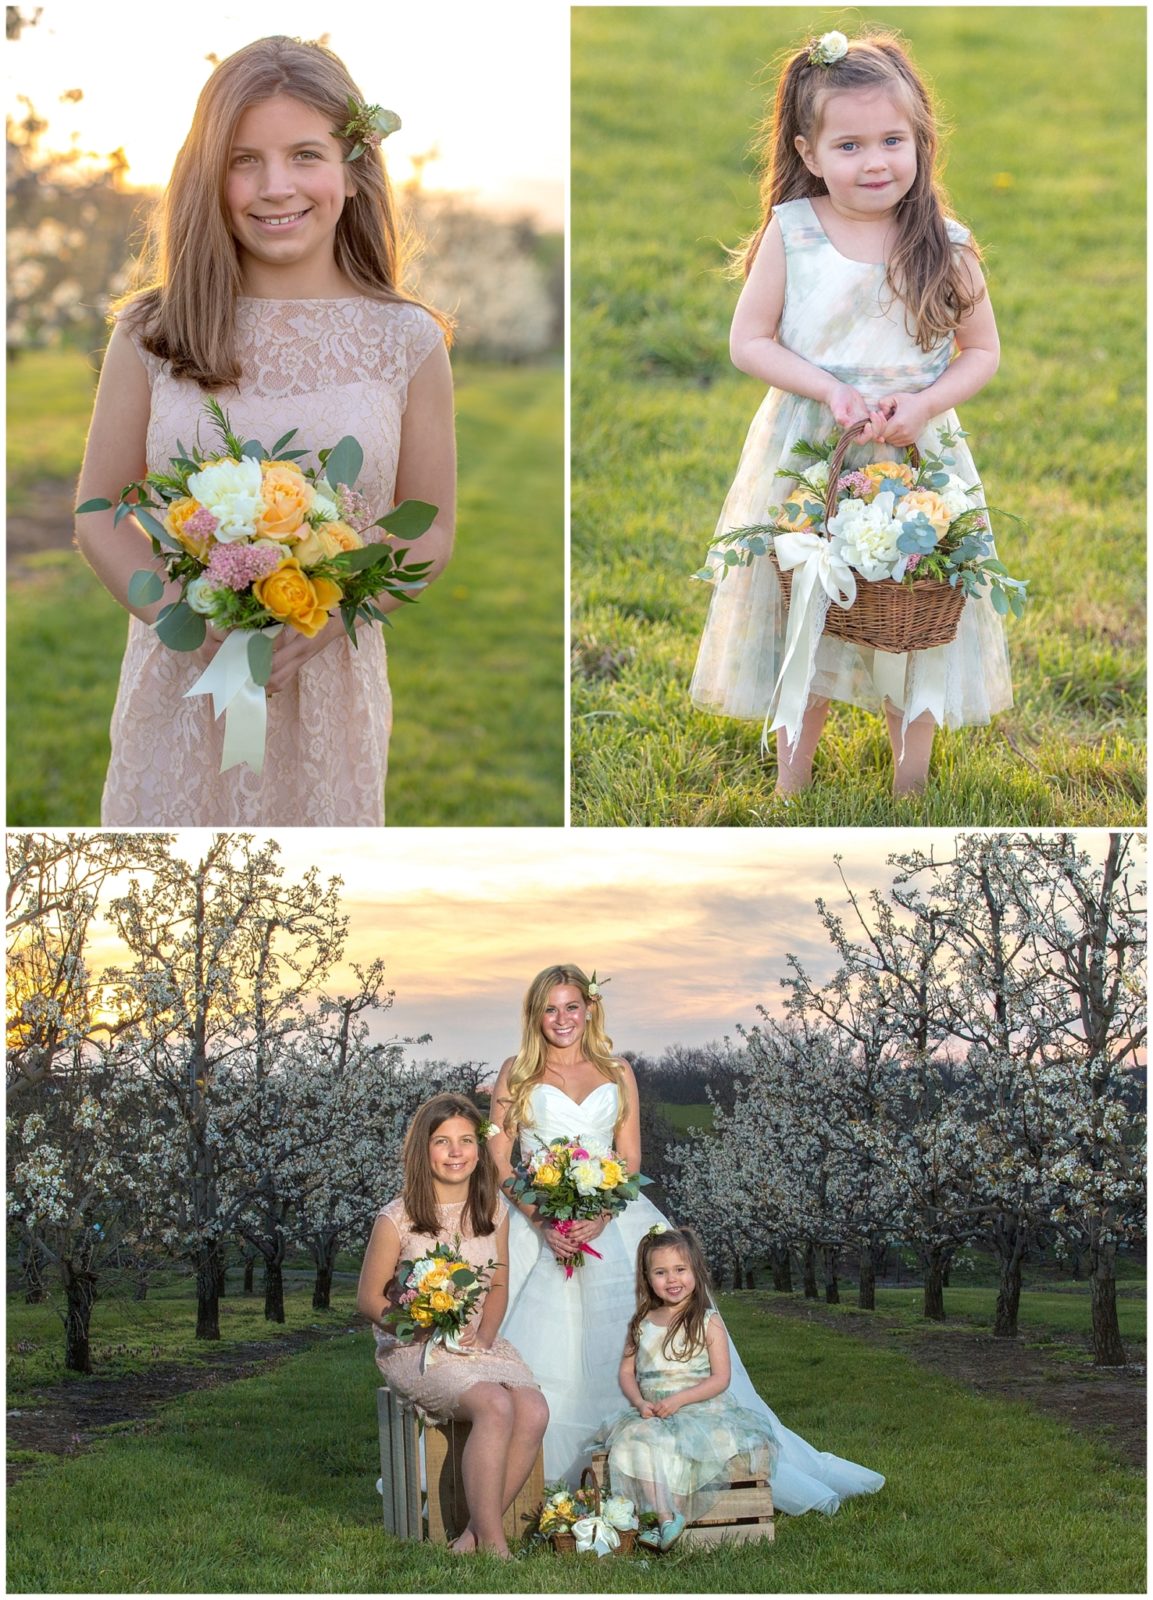 Spring Styled Bridal Shoot at Evan's Orchard in Georgetown, KY